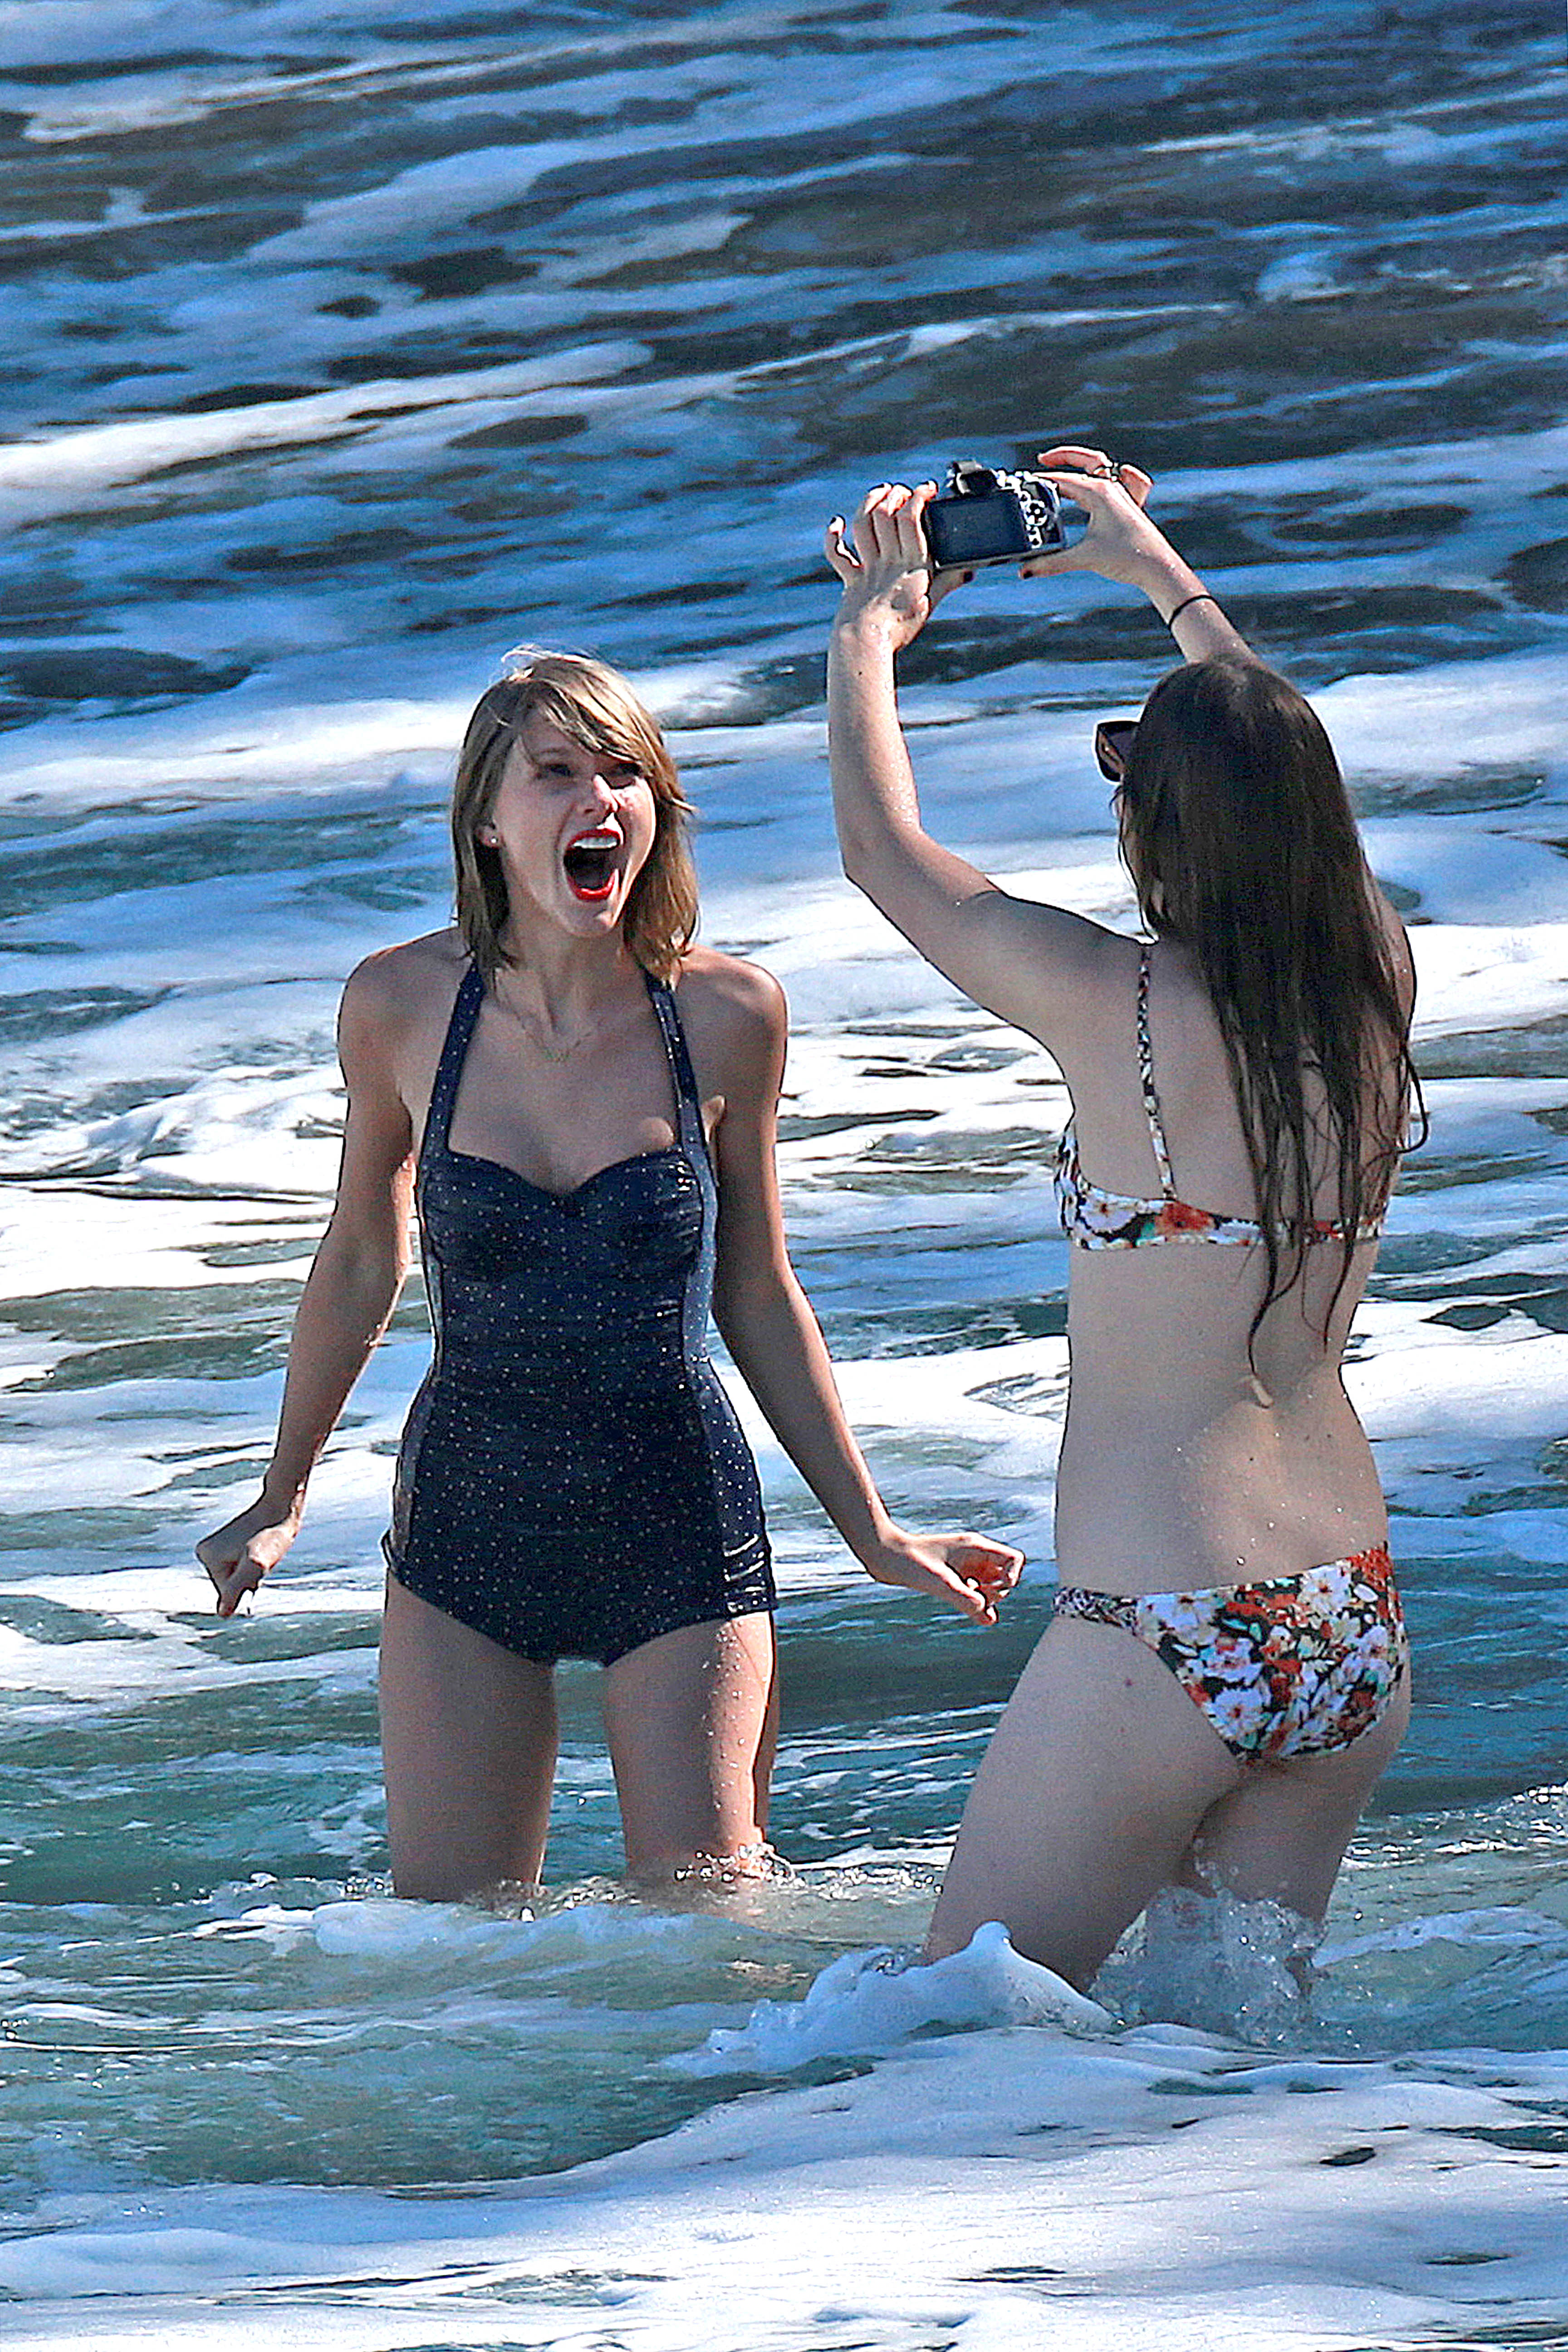 https://celebrityslips.com/wp-content/uploads/2015/01/taylor-swift-bathing-suit-and-her-friends-at-the-beach-21.jpg